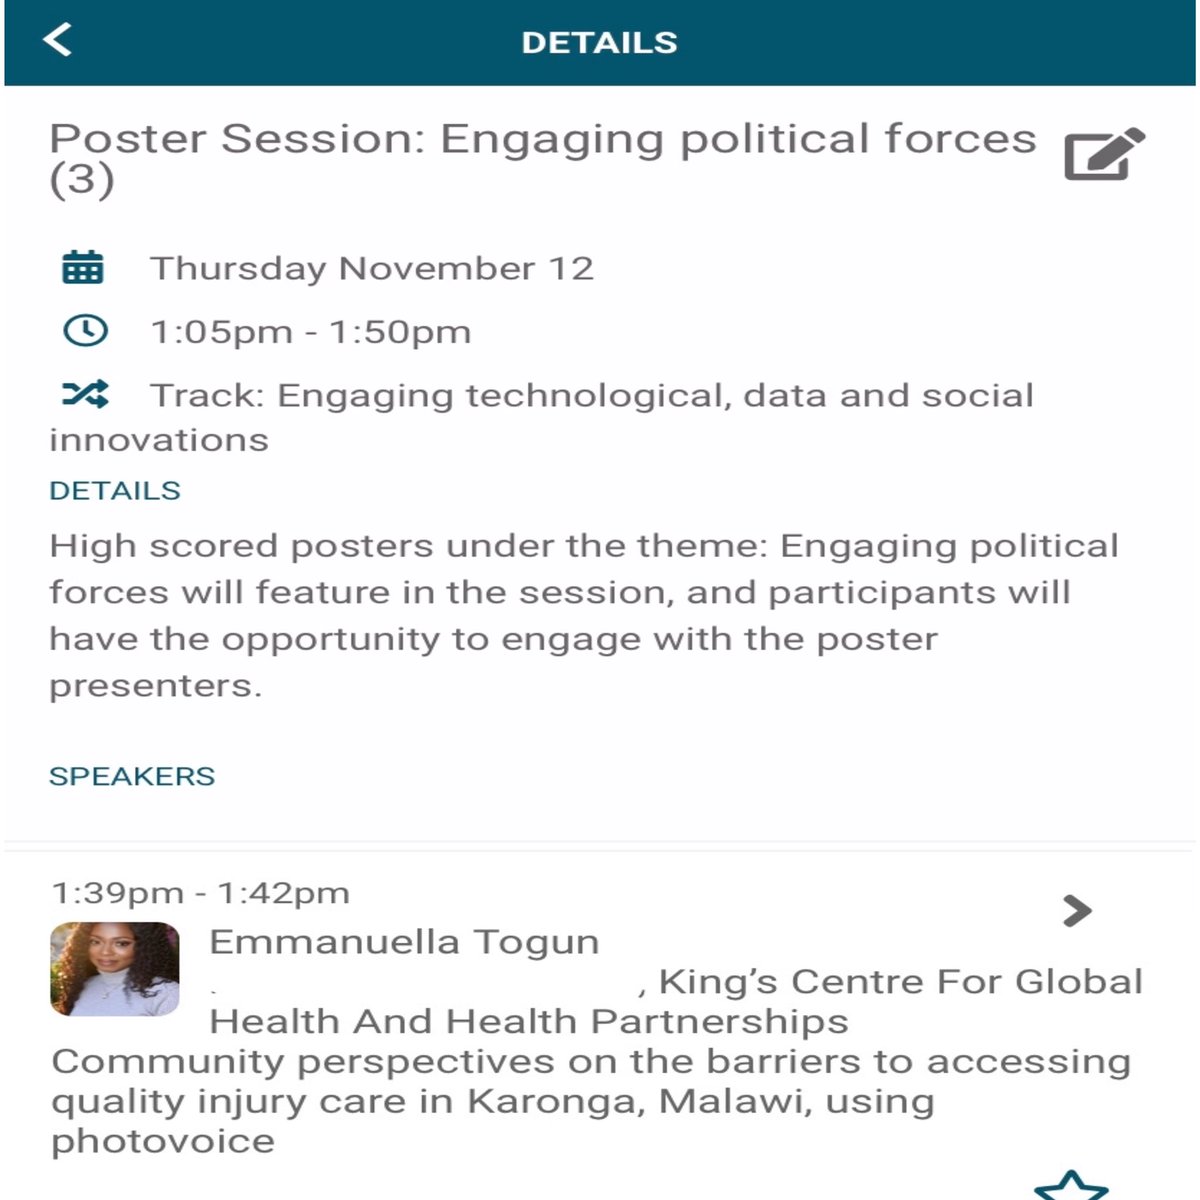 Excited to be presenting my research at #HSR2020 conference today, during the Engaging political forces poster session. 

I look forward to sharing this interesting work and grateful to the organizers for the opportunity. 
#healthsystemsresearcher #healthsystemstregthening